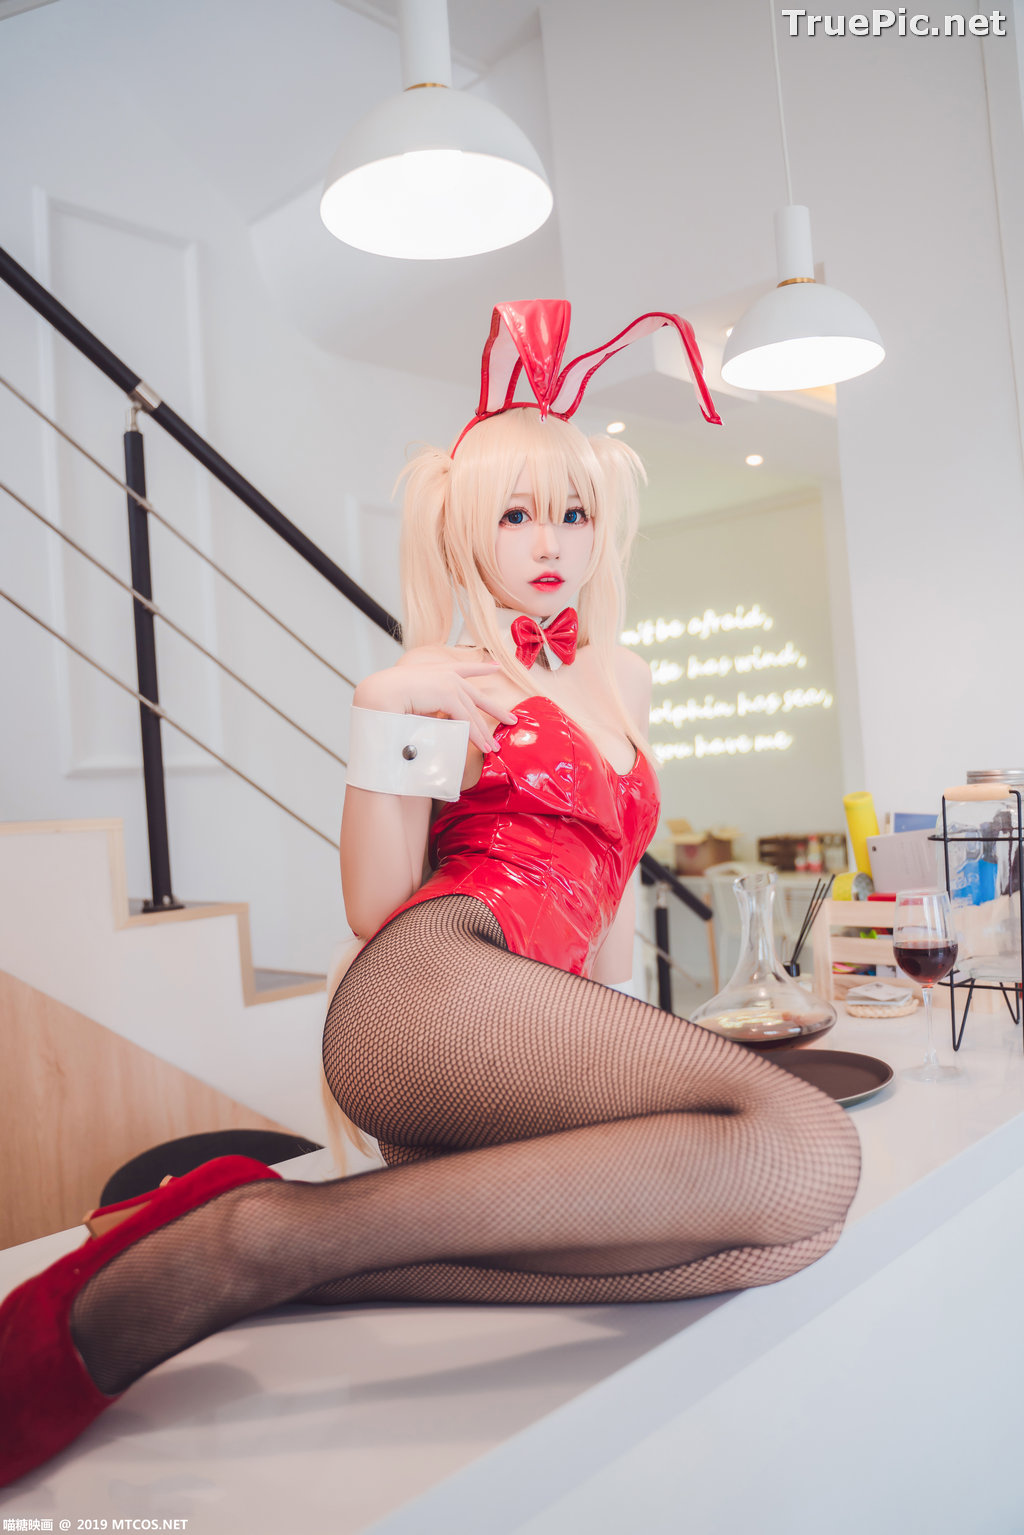 Image [MTCos] 喵糖映画 Vol.021 – Chinese Cute Model – Red Bunny Girl Cosplay - TruePic.net - Picture-22